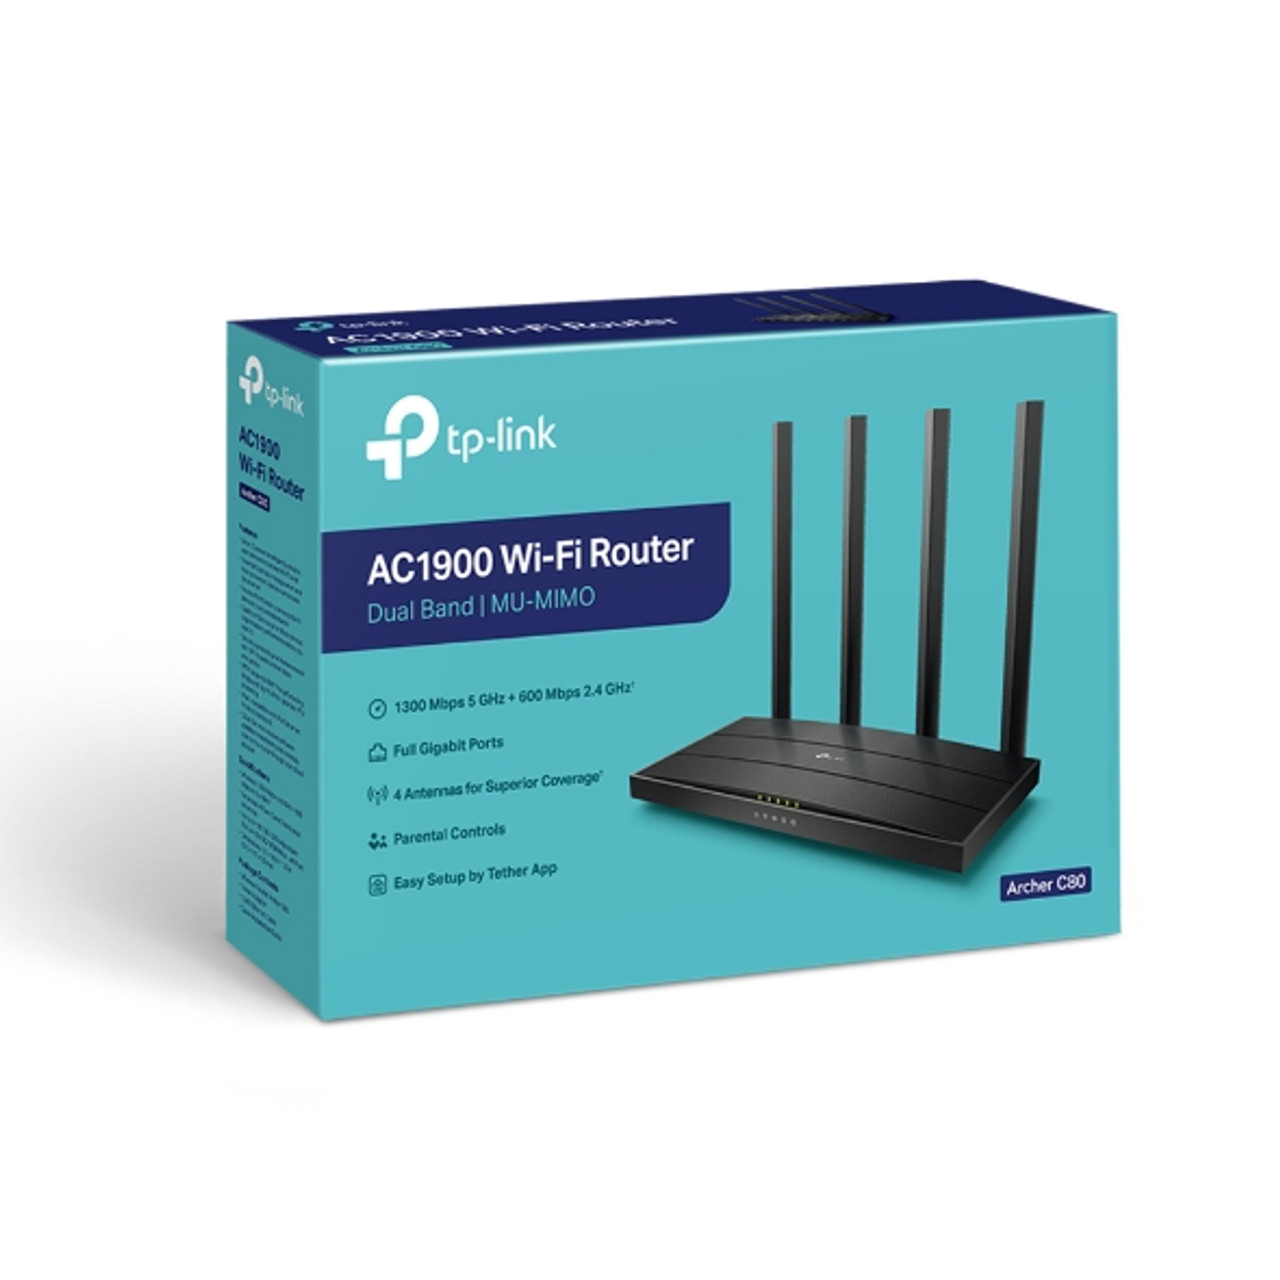 TP-Link Router Wi-Fi AC1900 Gigabit Dual Band 4 Antennas MU-MIMO 1300 Mbps on the 5 GHz band and 600 Mbps on the 2.4 GHz band